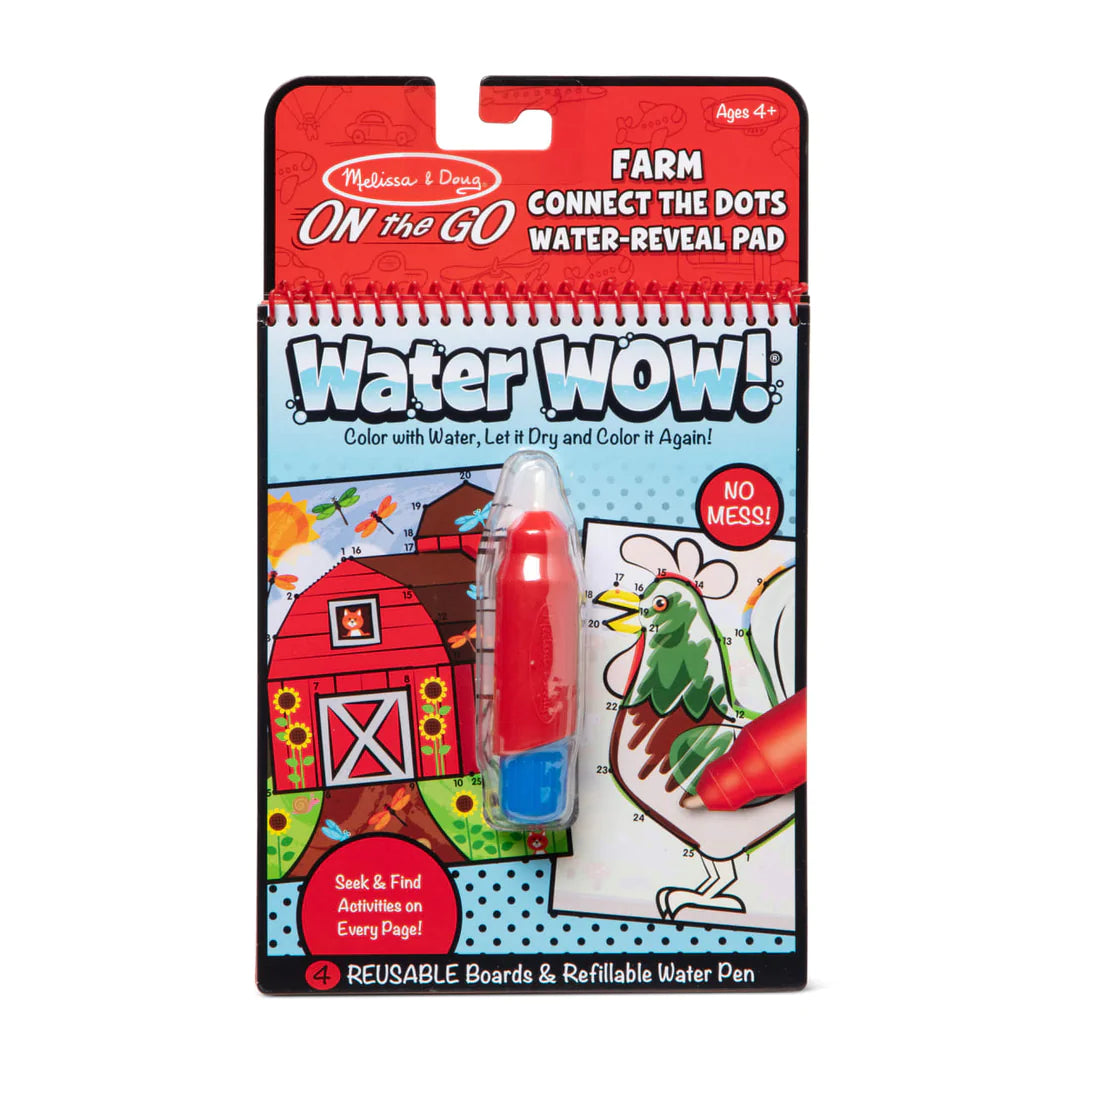 Water Wow! Connect the Dots Farm - On the Go Travel Activity